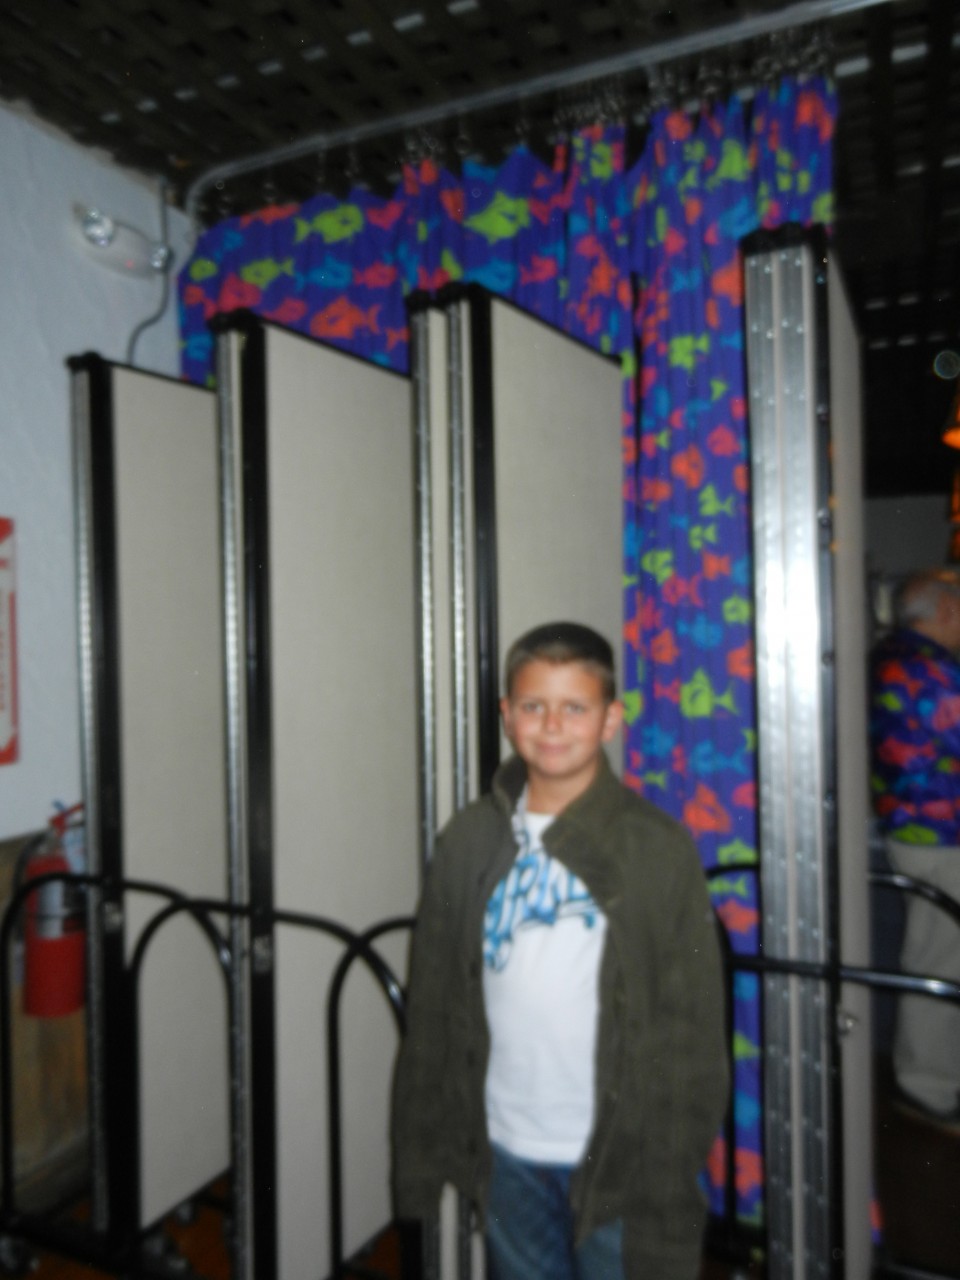 A teen boy stands in front of 4 closed room dividers